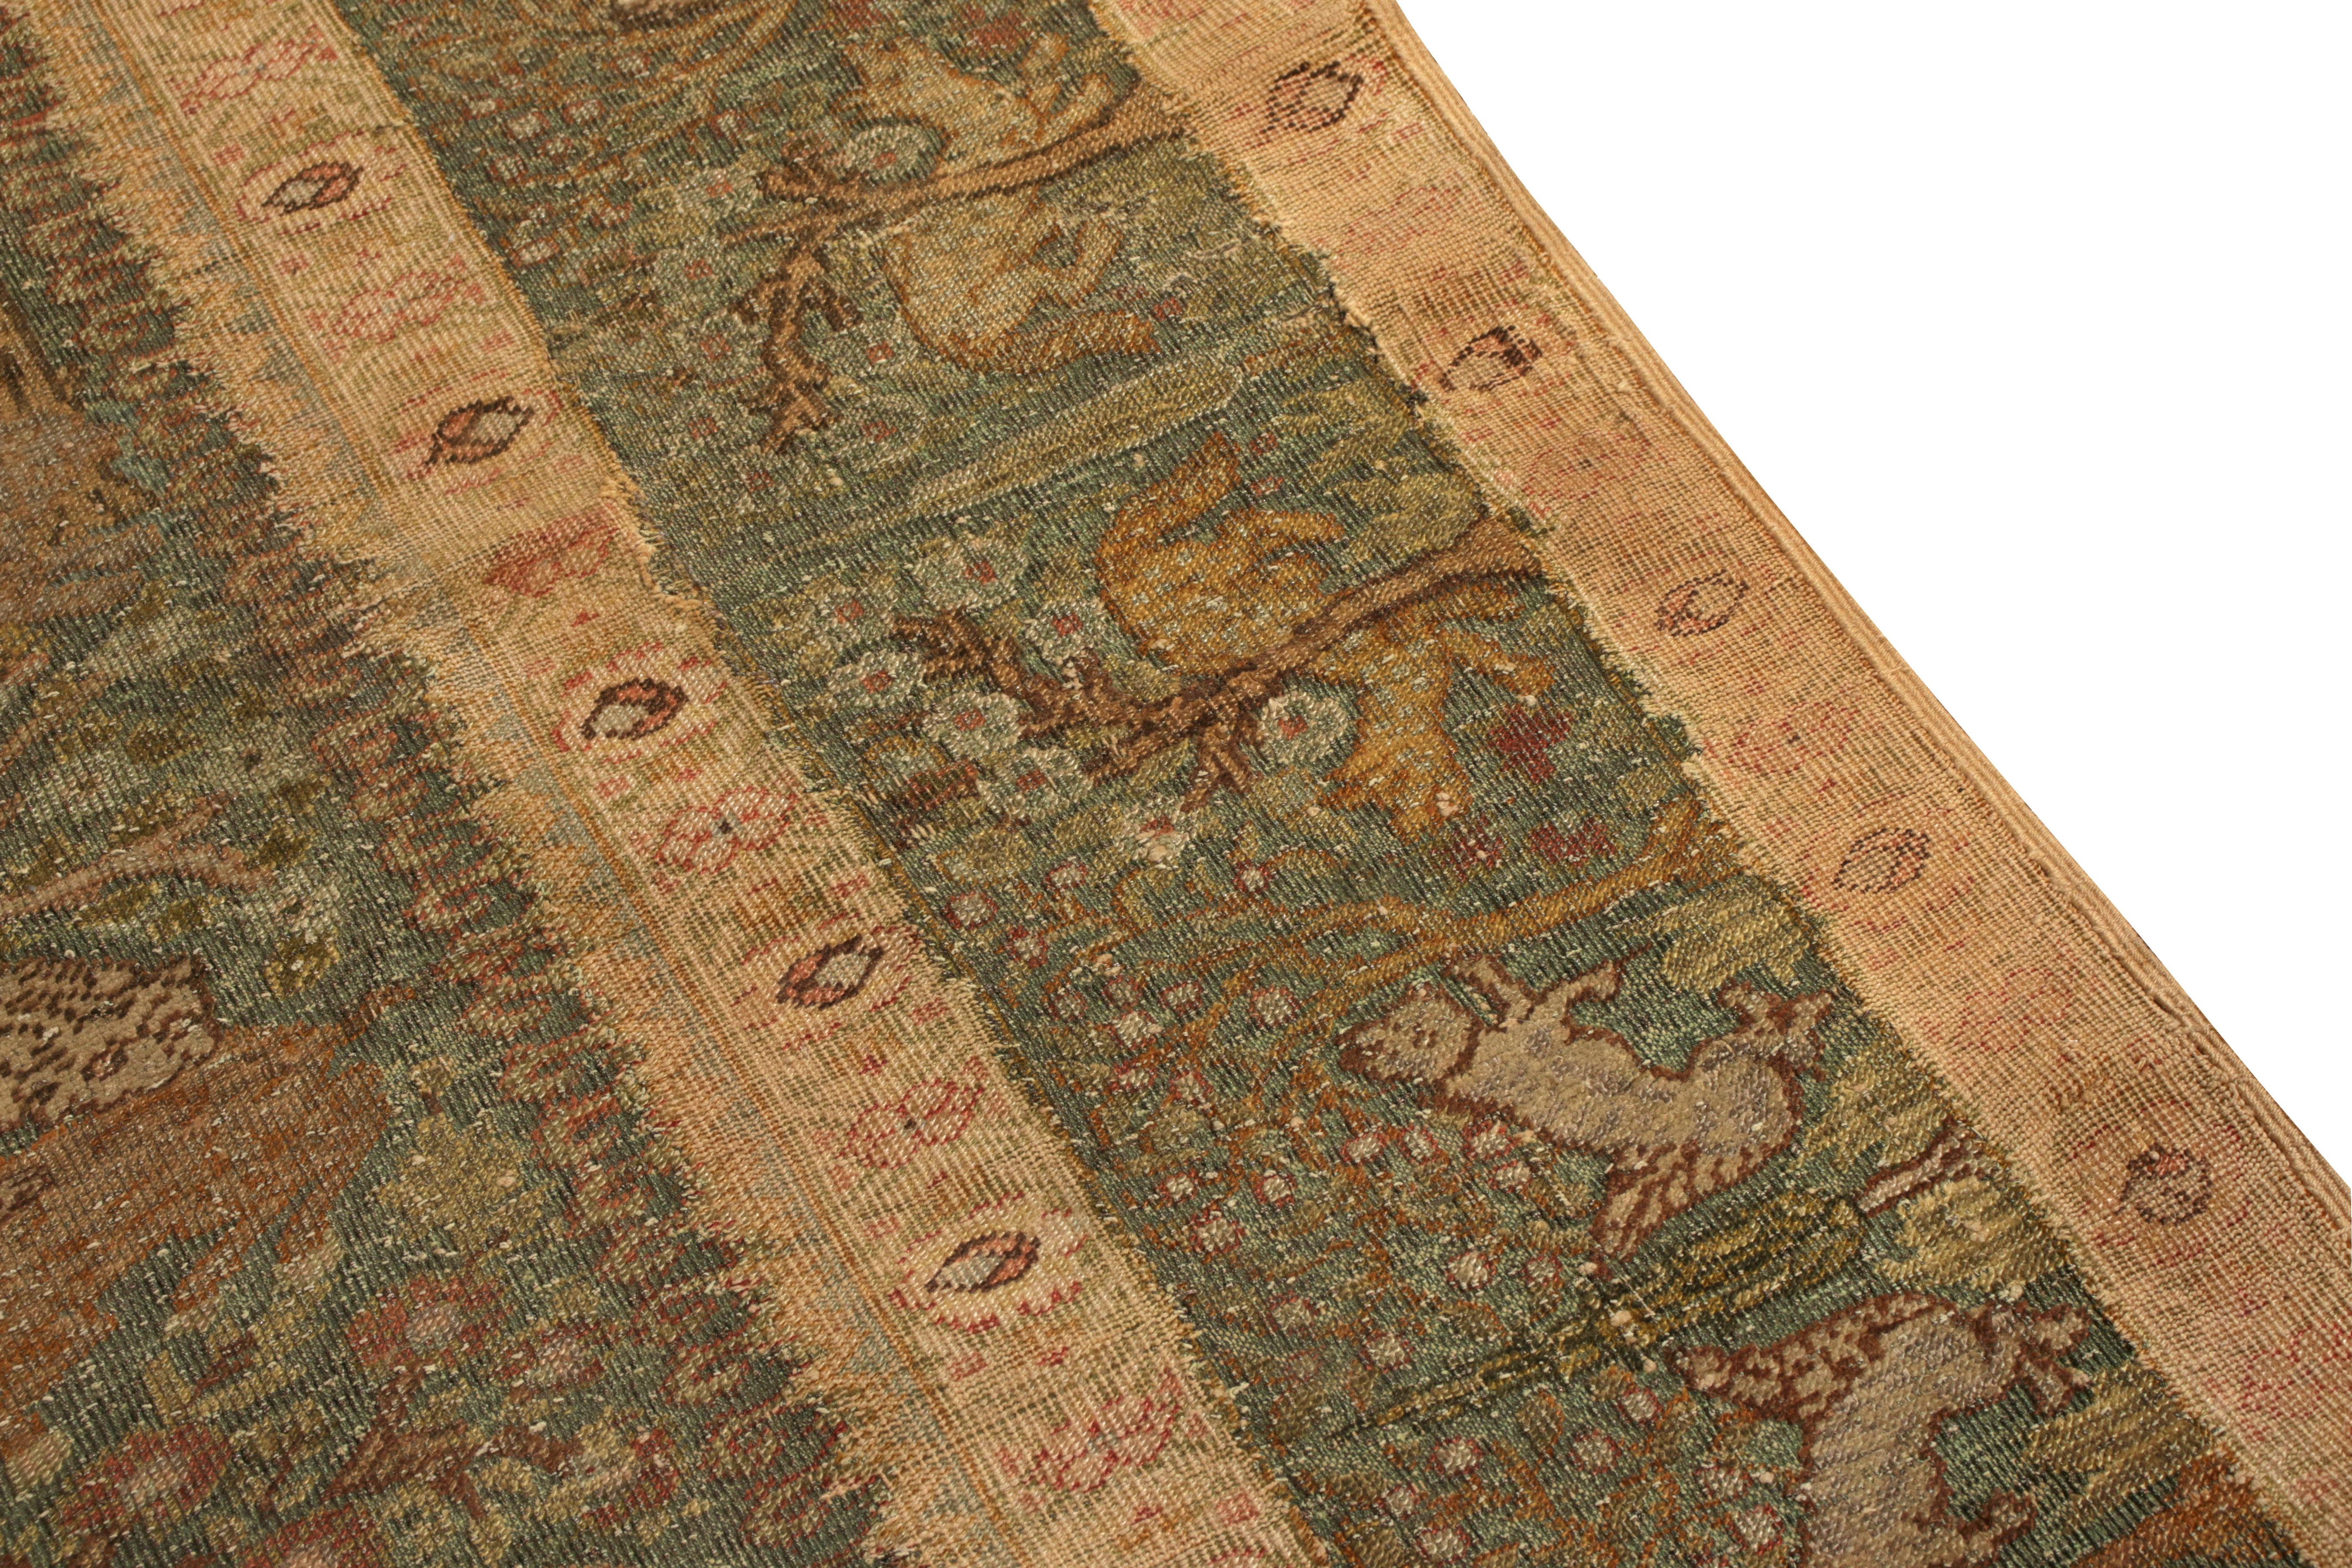 Other Antique Kayseri Rug in Green and Beige-Brown Floral Pattern by Rug & Kilim For Sale